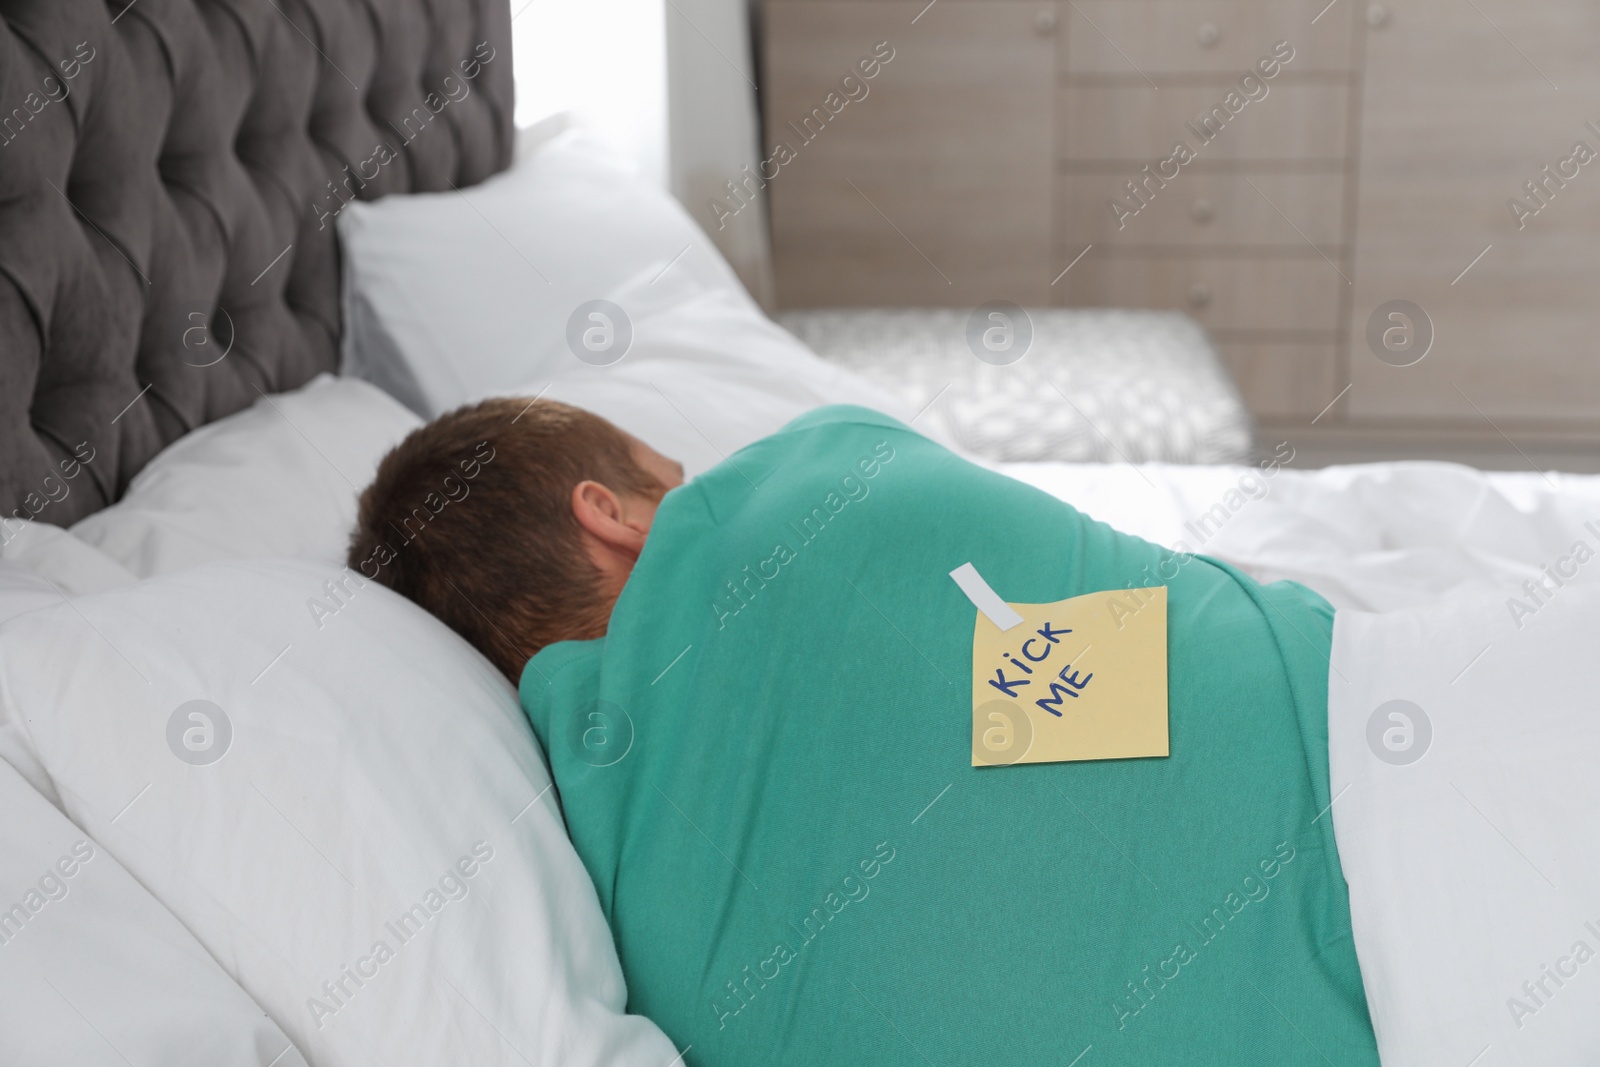 Photo of Yellow note with text "Kick me" attached to sleeping man's back. April Fool's day